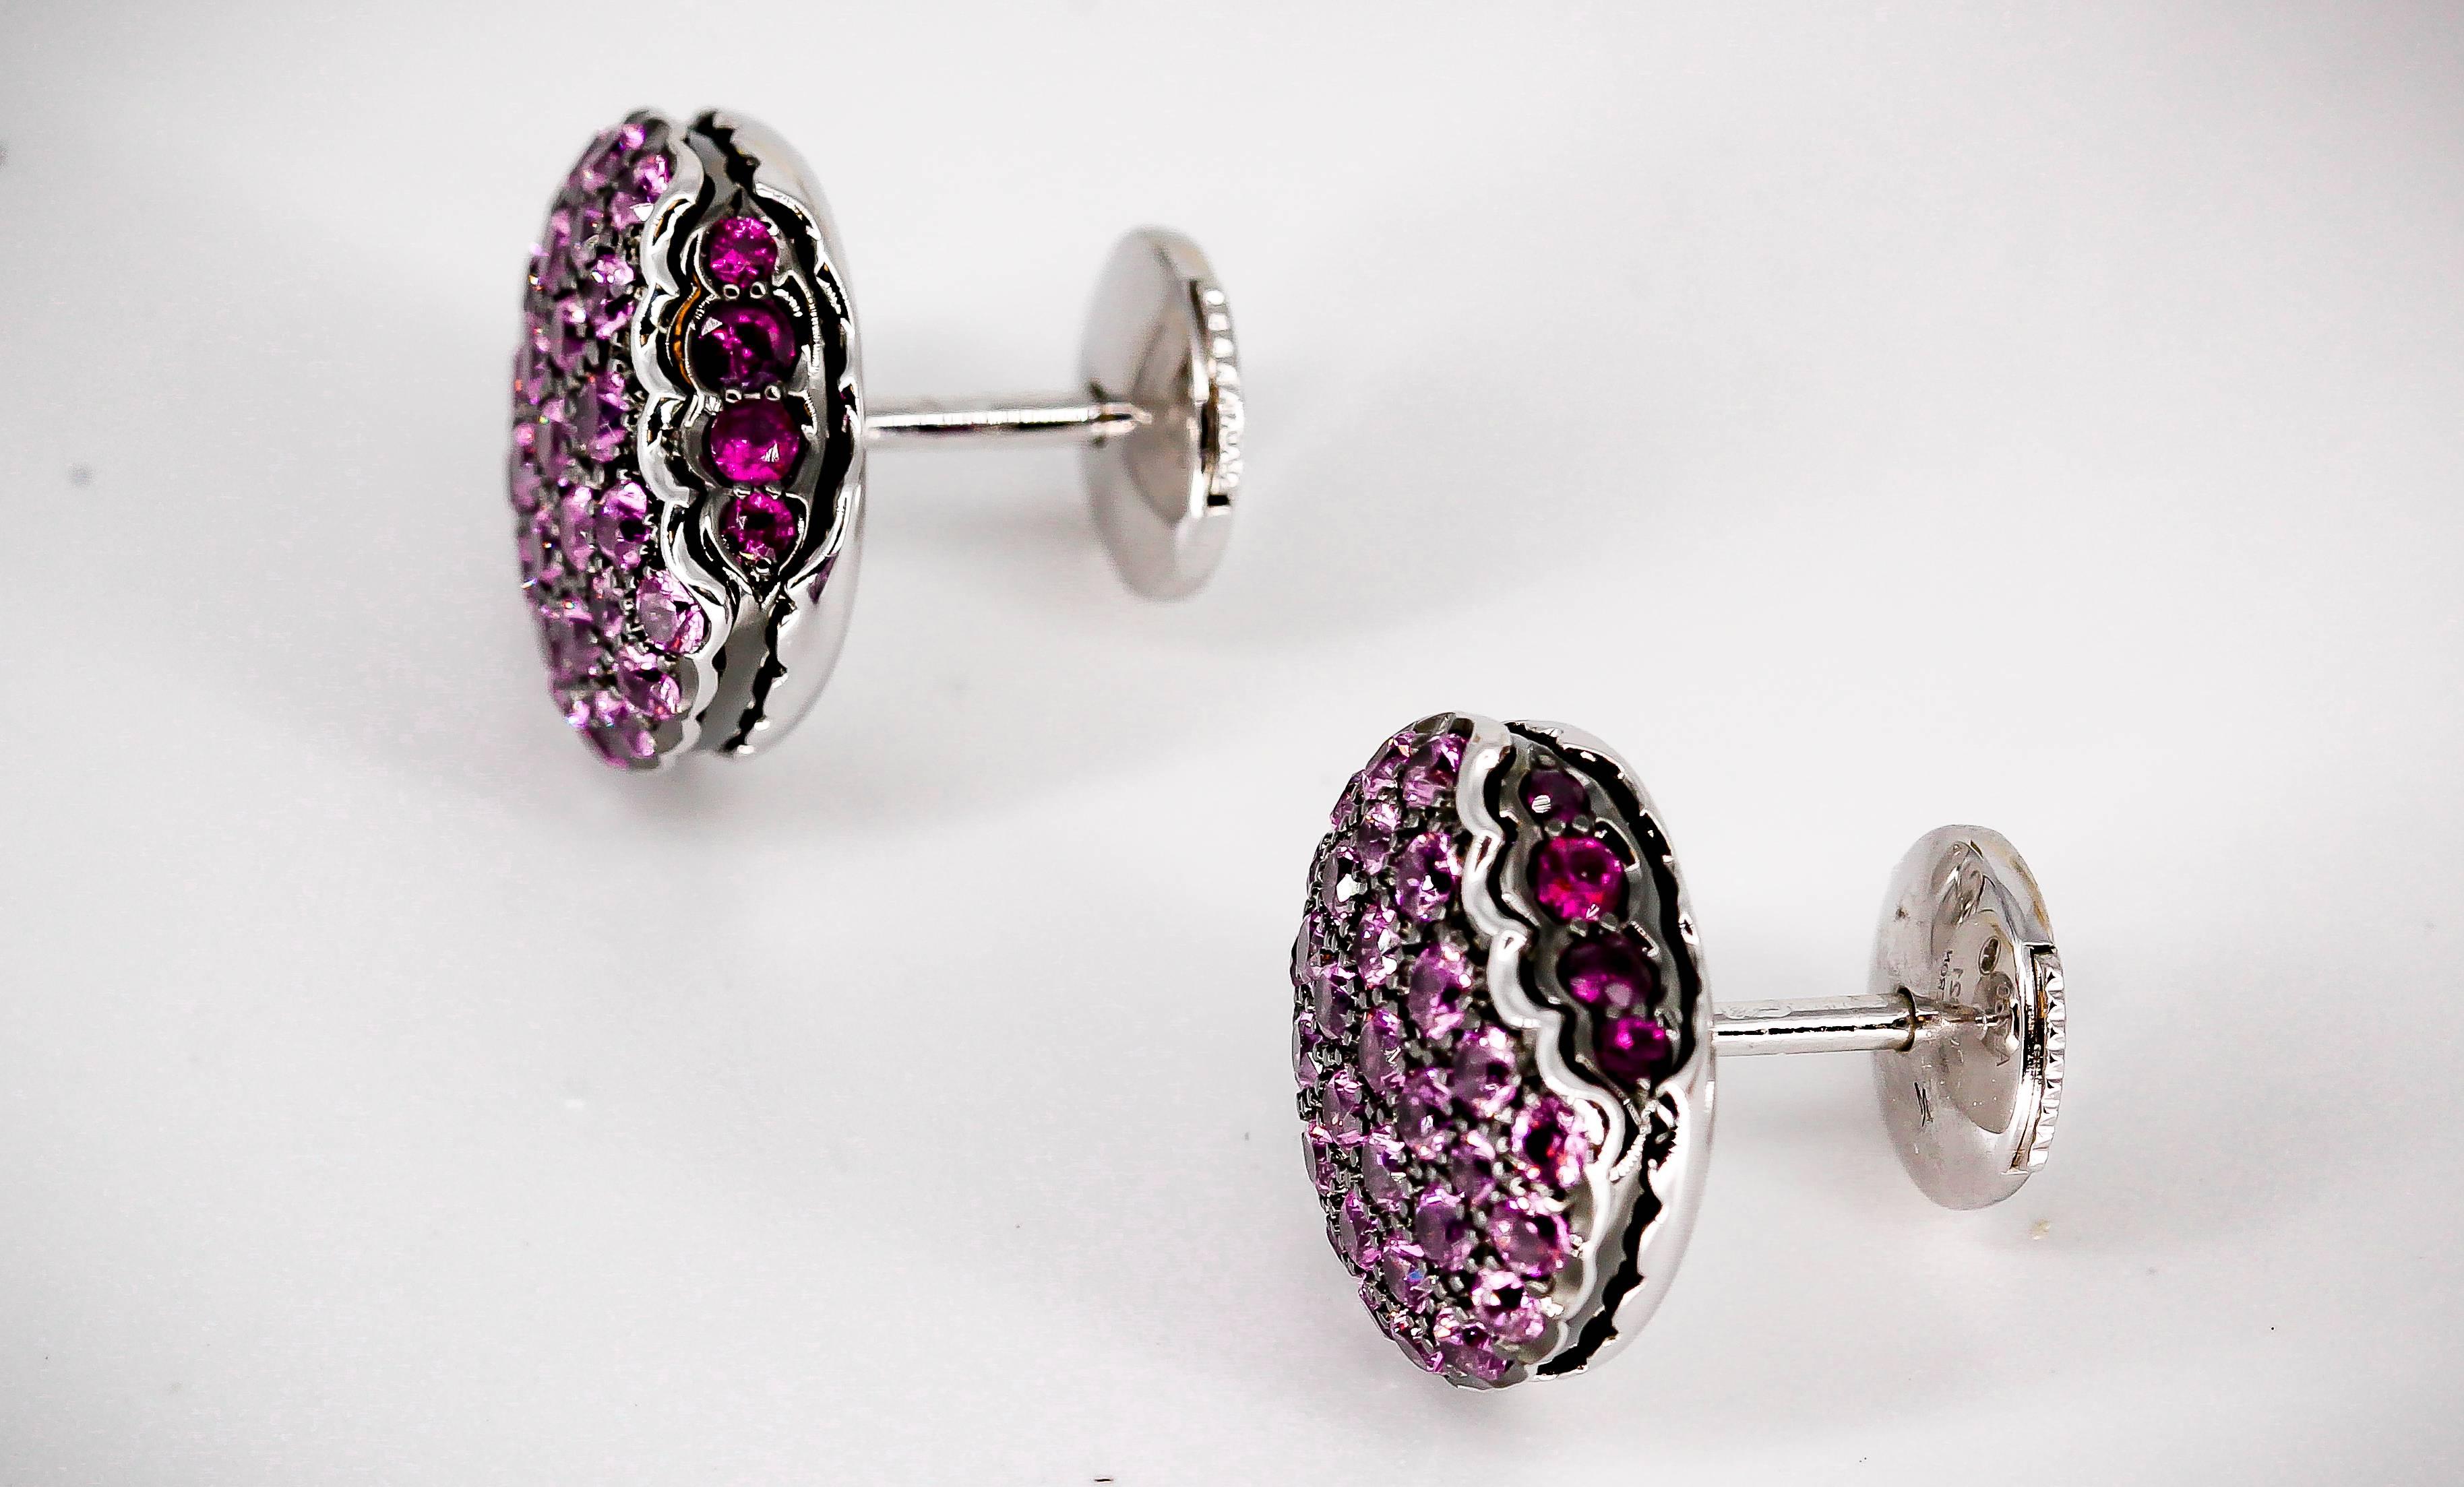 Chic rubies, pink sapphires, and 18K white gold stud earrings from the 